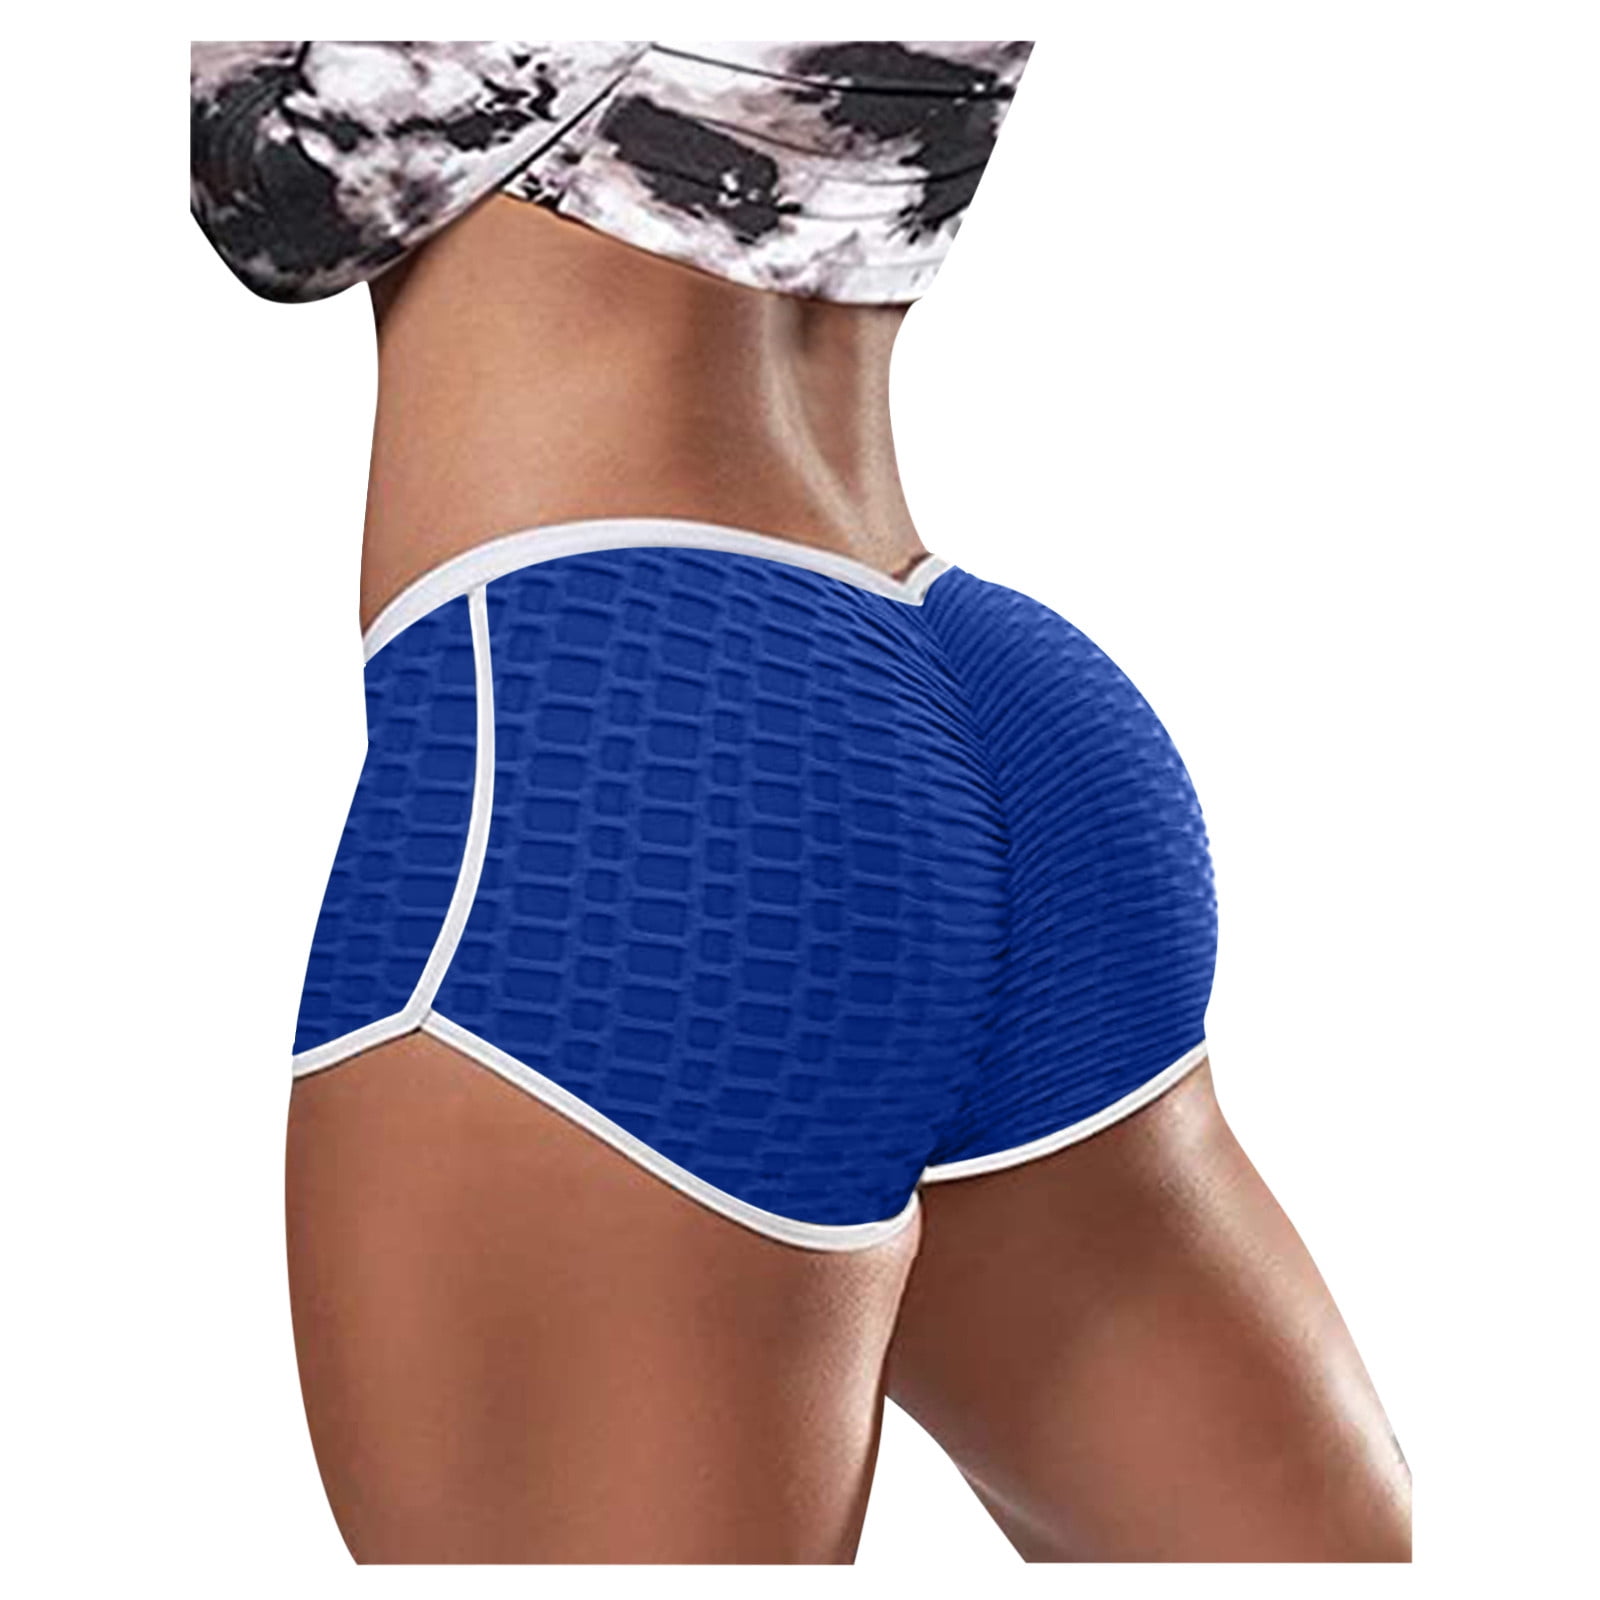 YYDGH Sports Booty Shorts for Women Side Drawstring High Waisted Yoga  Shorts Bubble Textured Scrunch Butt Lifting Hot Short Blue M